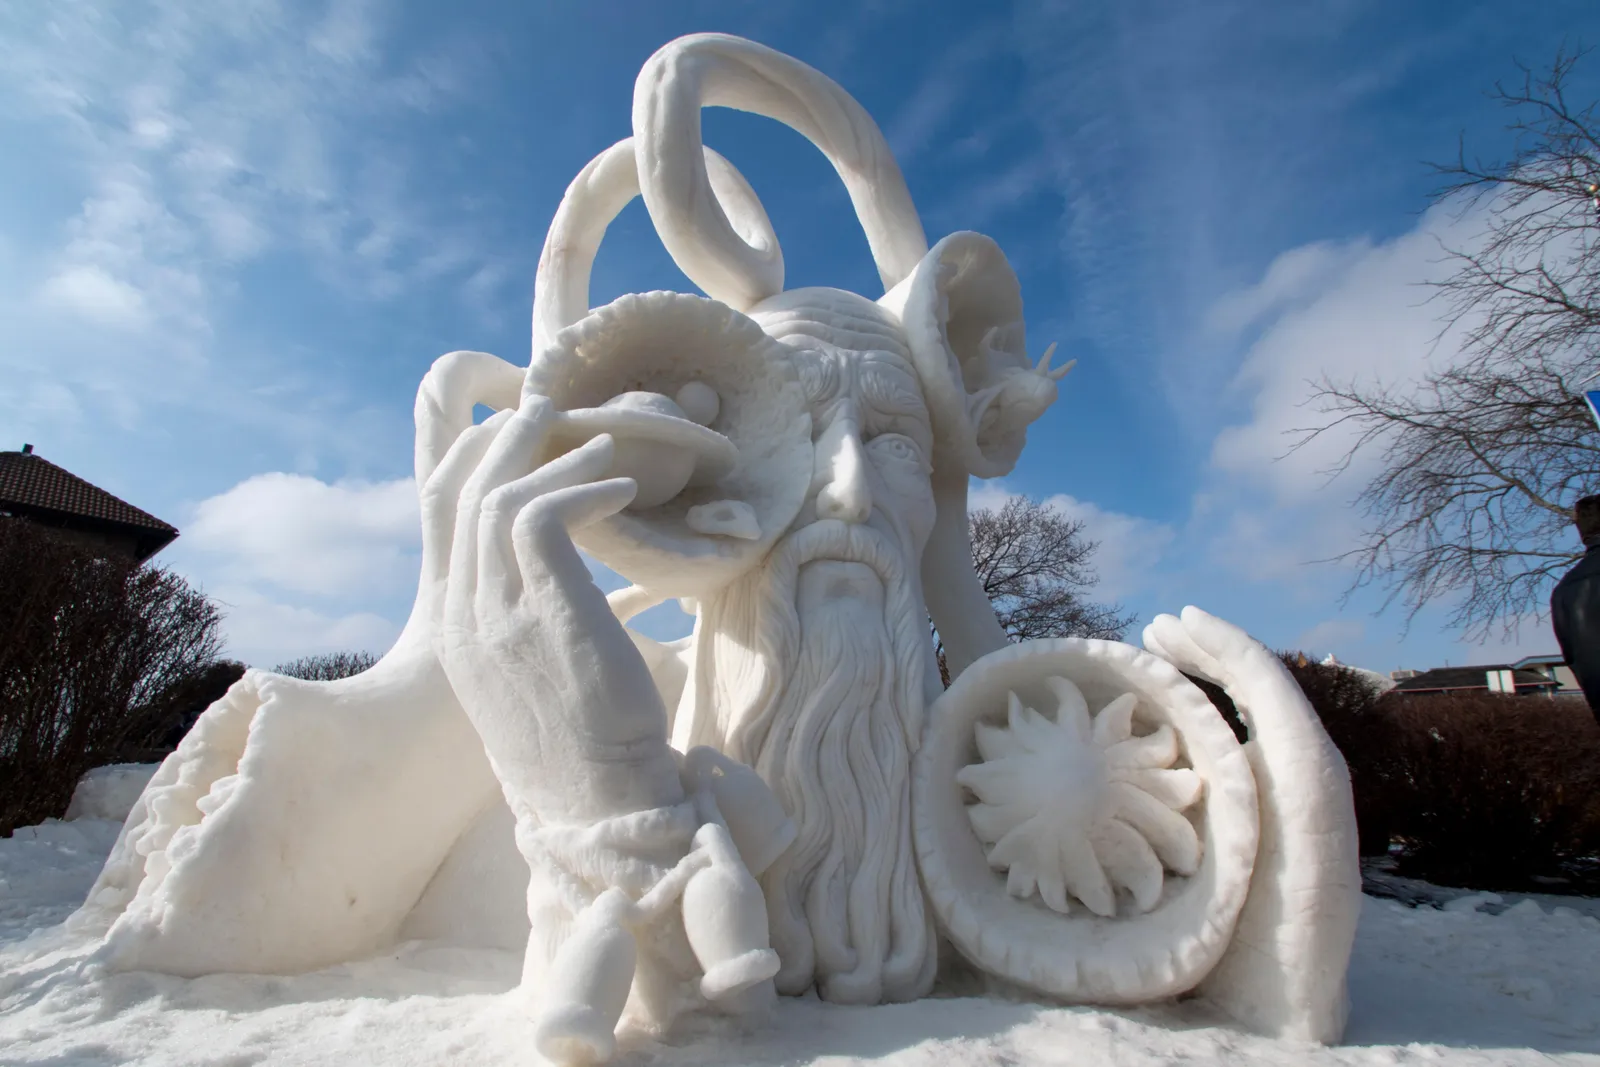 Learn the Secrets of the World's Best Snow Sculptors